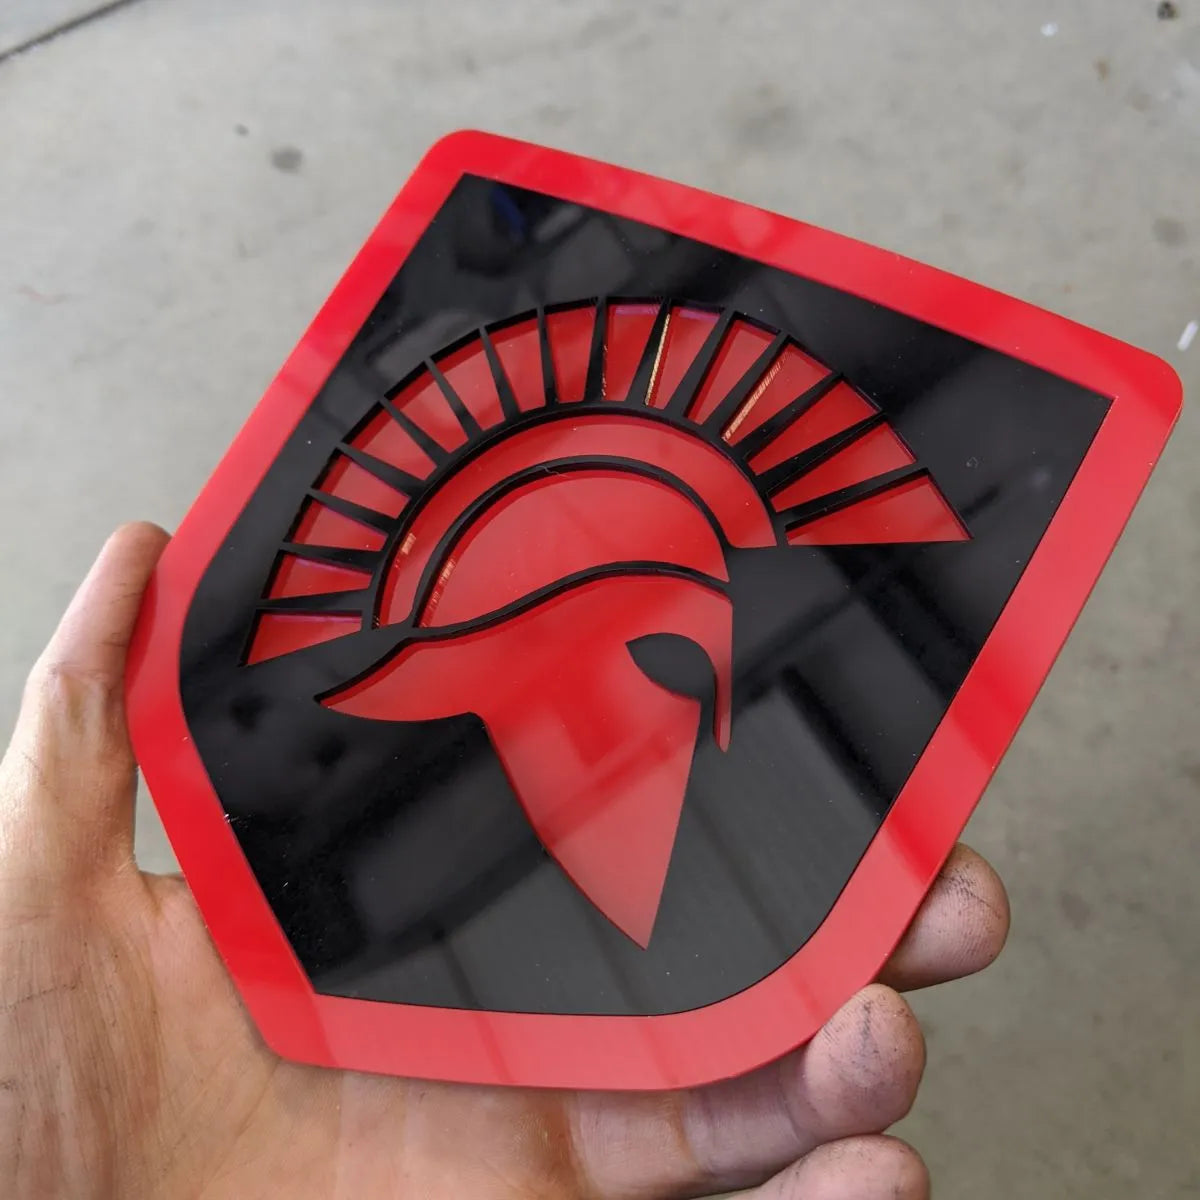 Spartan Badge - Fits 2009-2018 Dodge® Ram® Tailgate -1500, 2500, 3500 - Red and Black